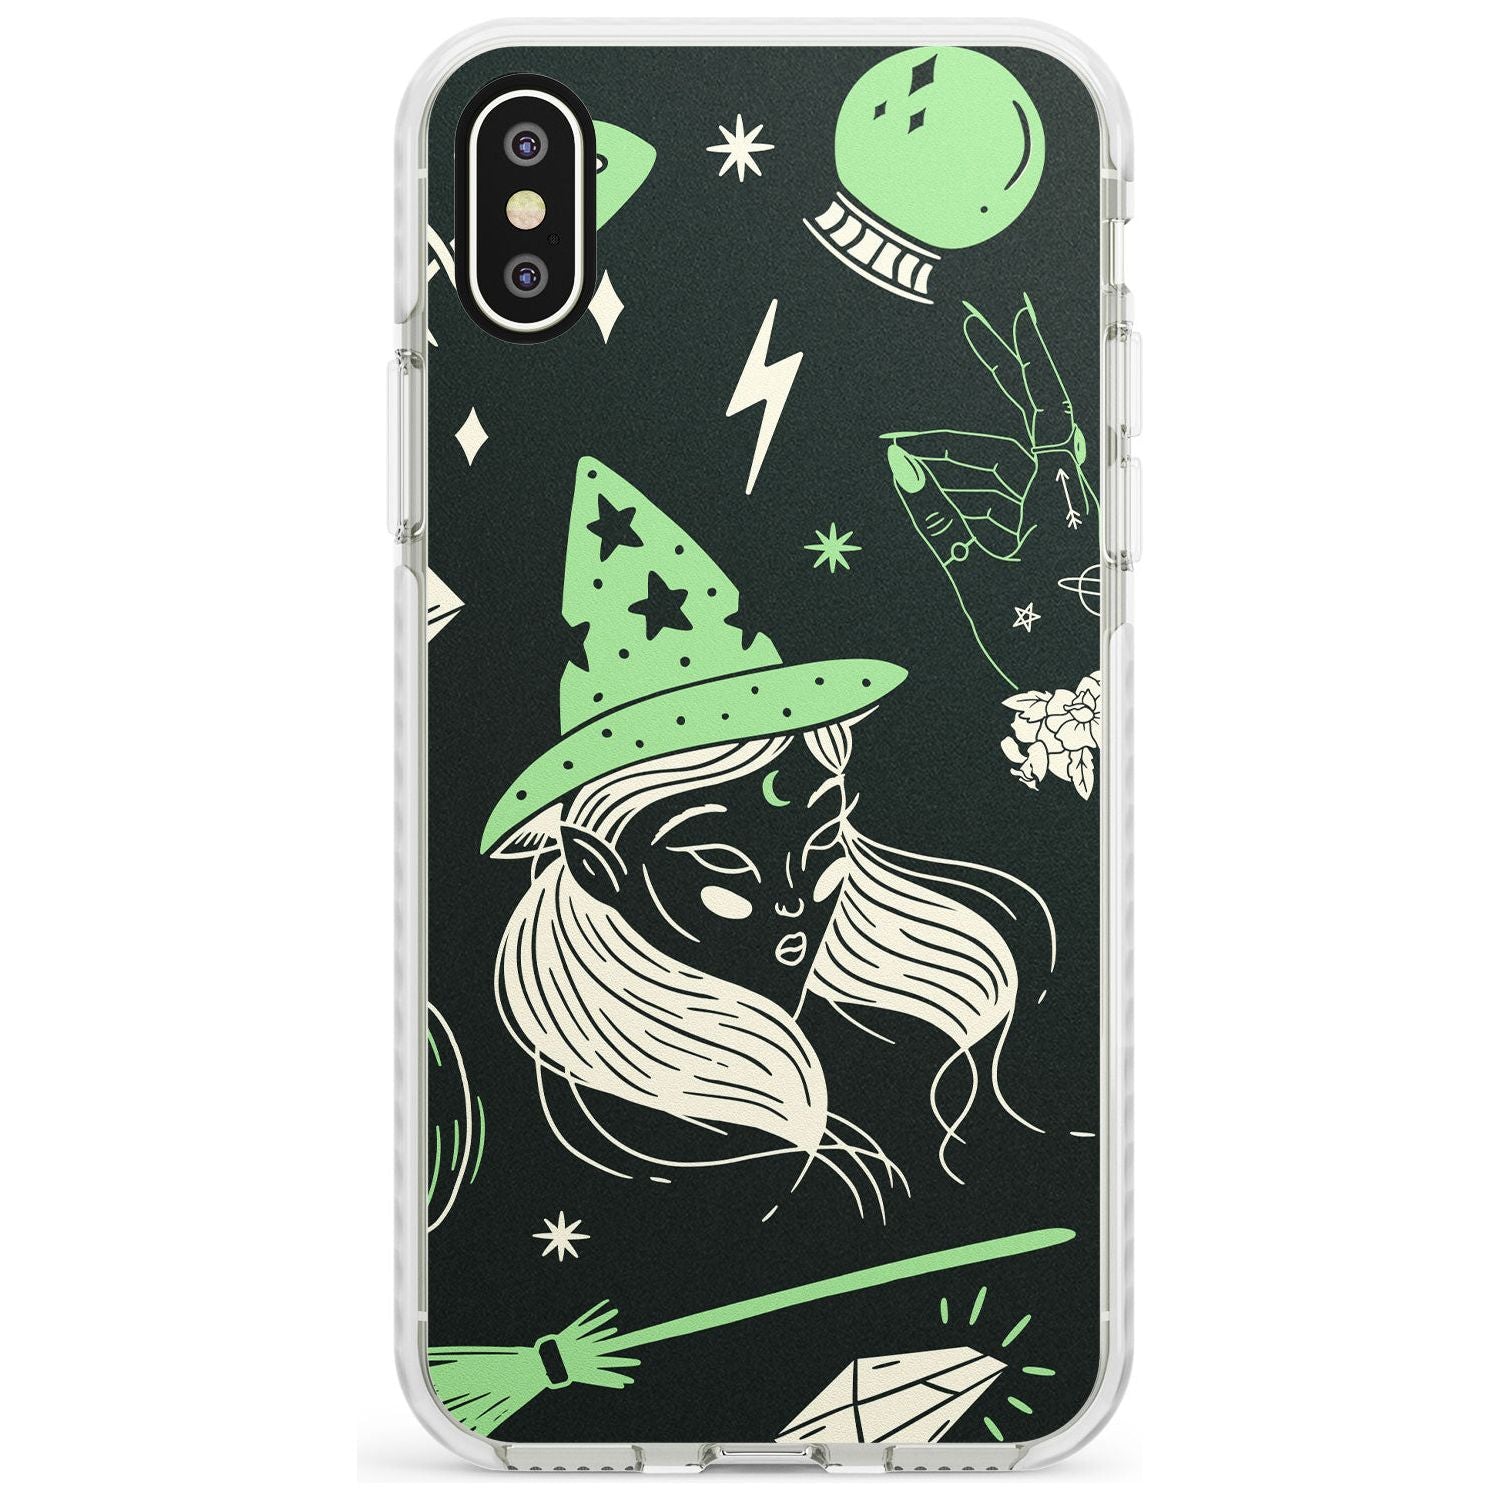 Halloween Mix Pattern Phone Case for iPhone X XS Max XR